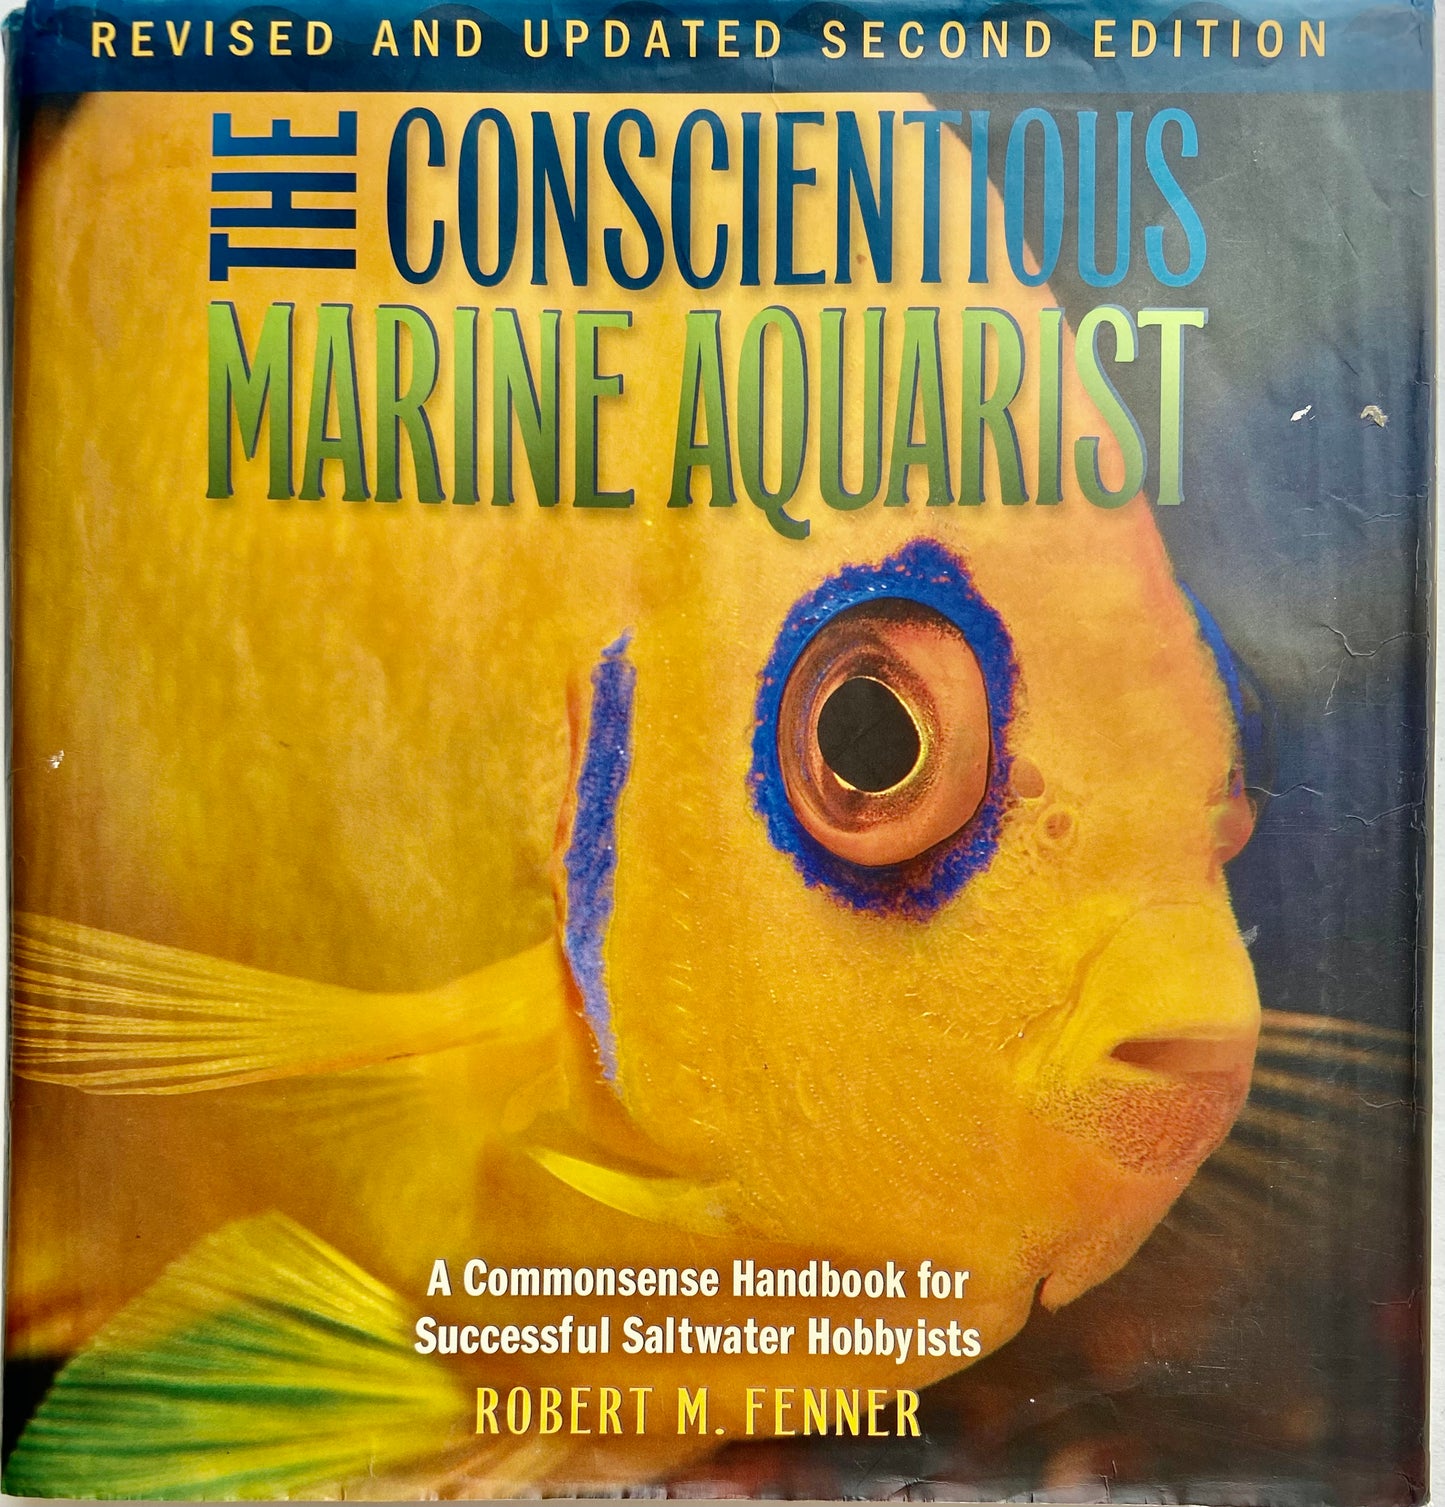 The Conscientious Marine Aquarist: A Commonsense Handbook for Successful Saltwater Hobbyists (Microcosm/T.F.H. Professional)